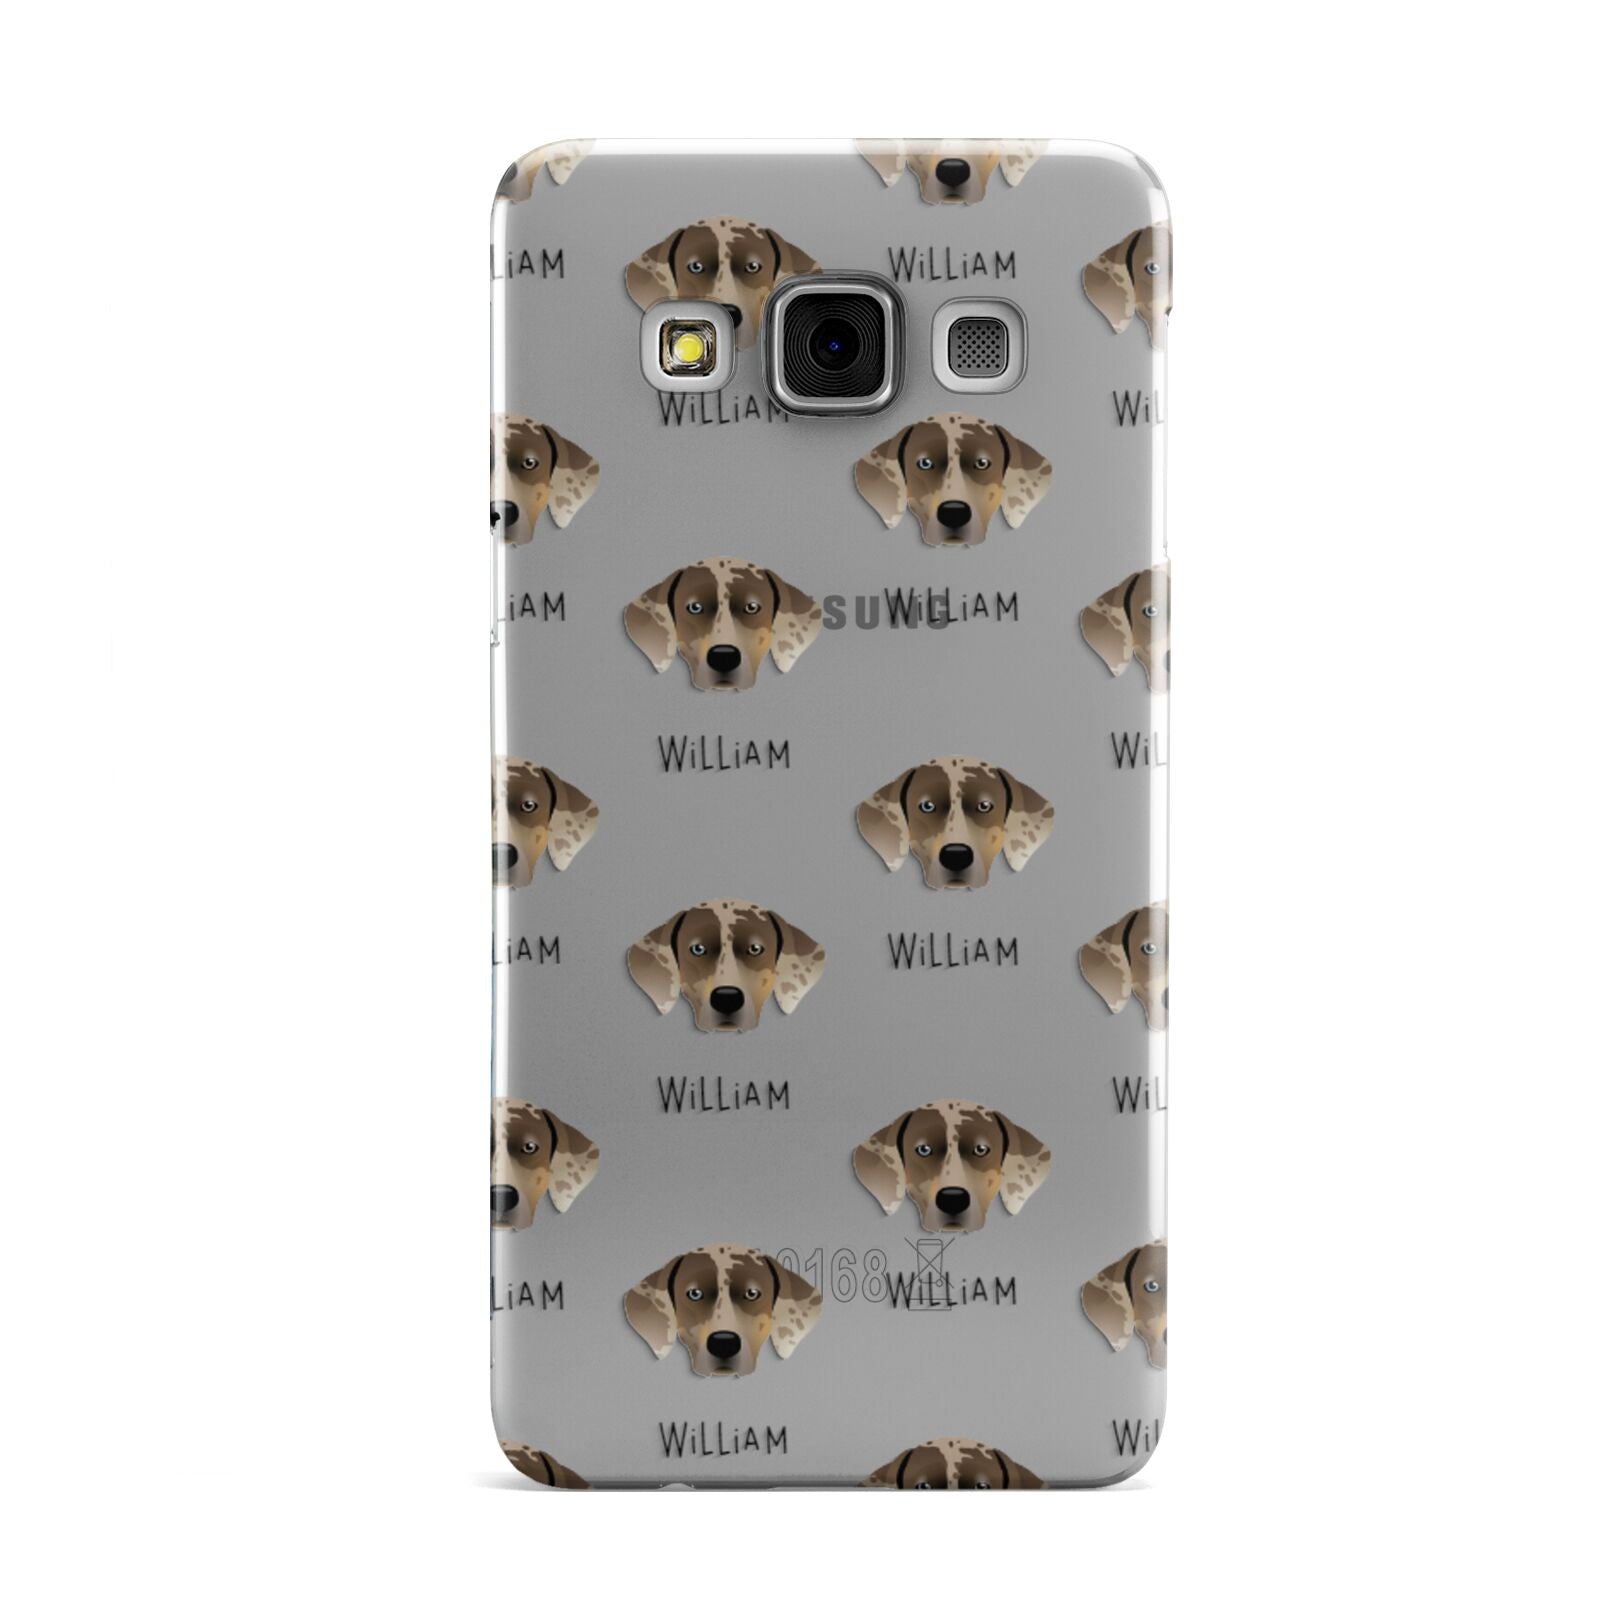 Catahoula Leopard Dog Icon with Name Samsung Galaxy A3 Case